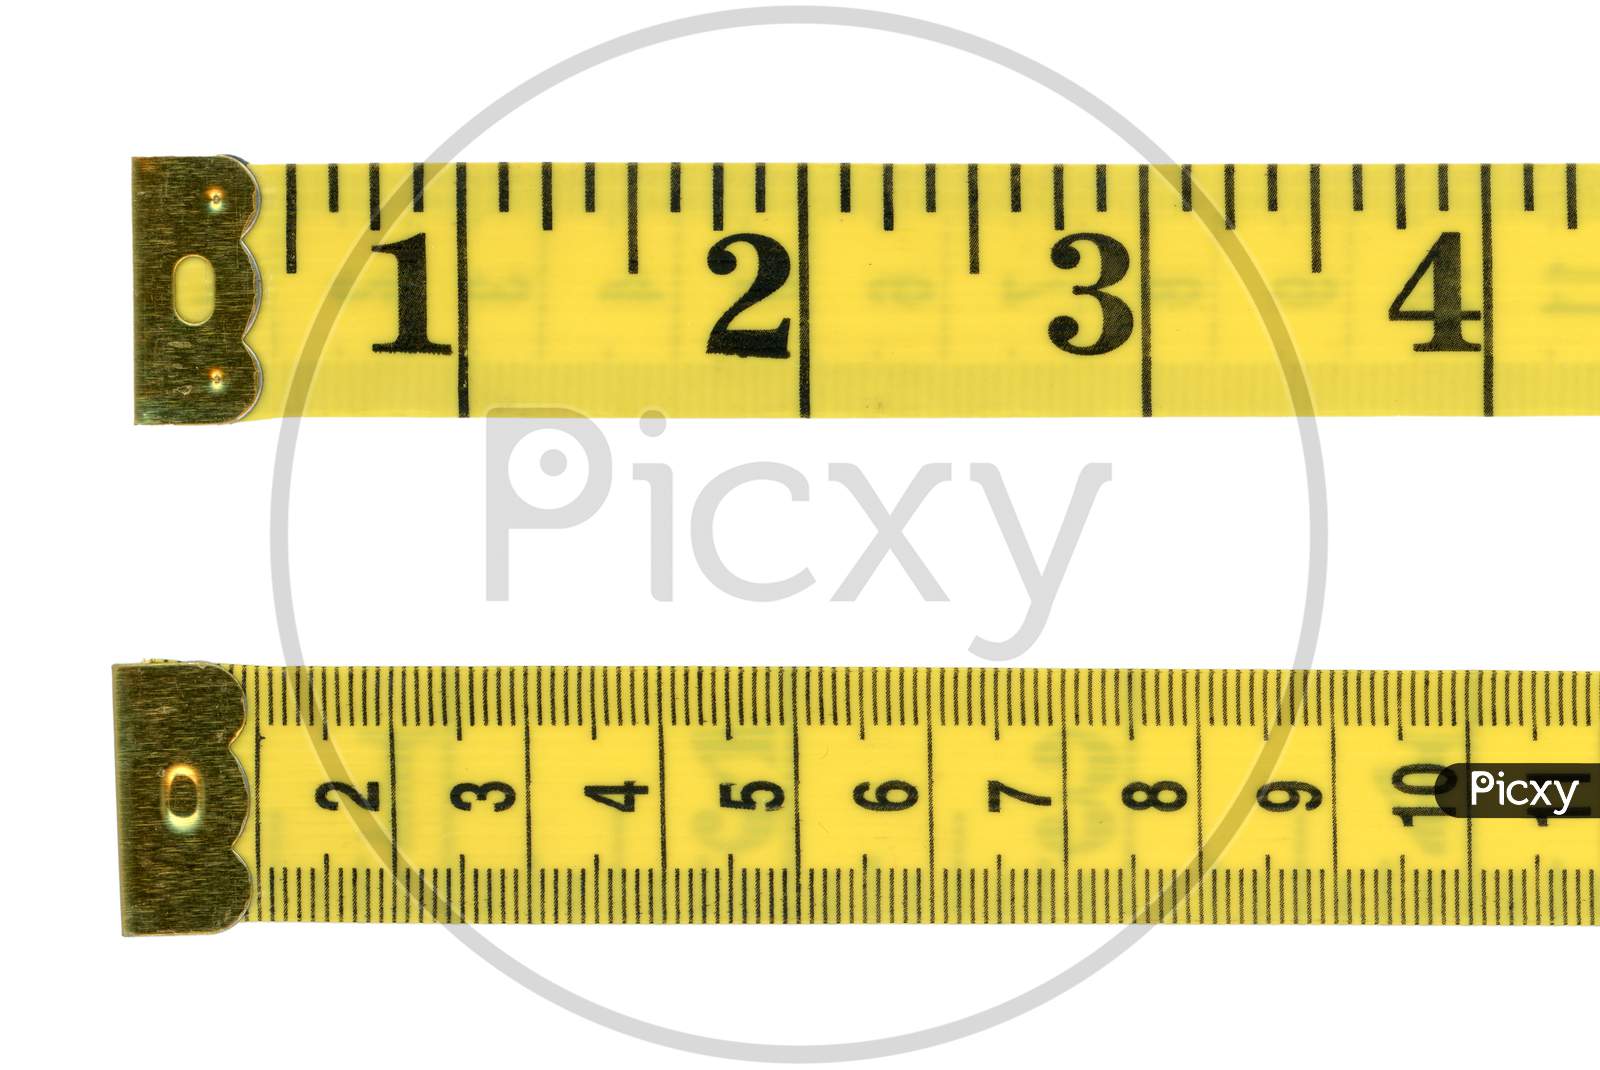 Tape Measure Ruler With Imperial And Metric Units